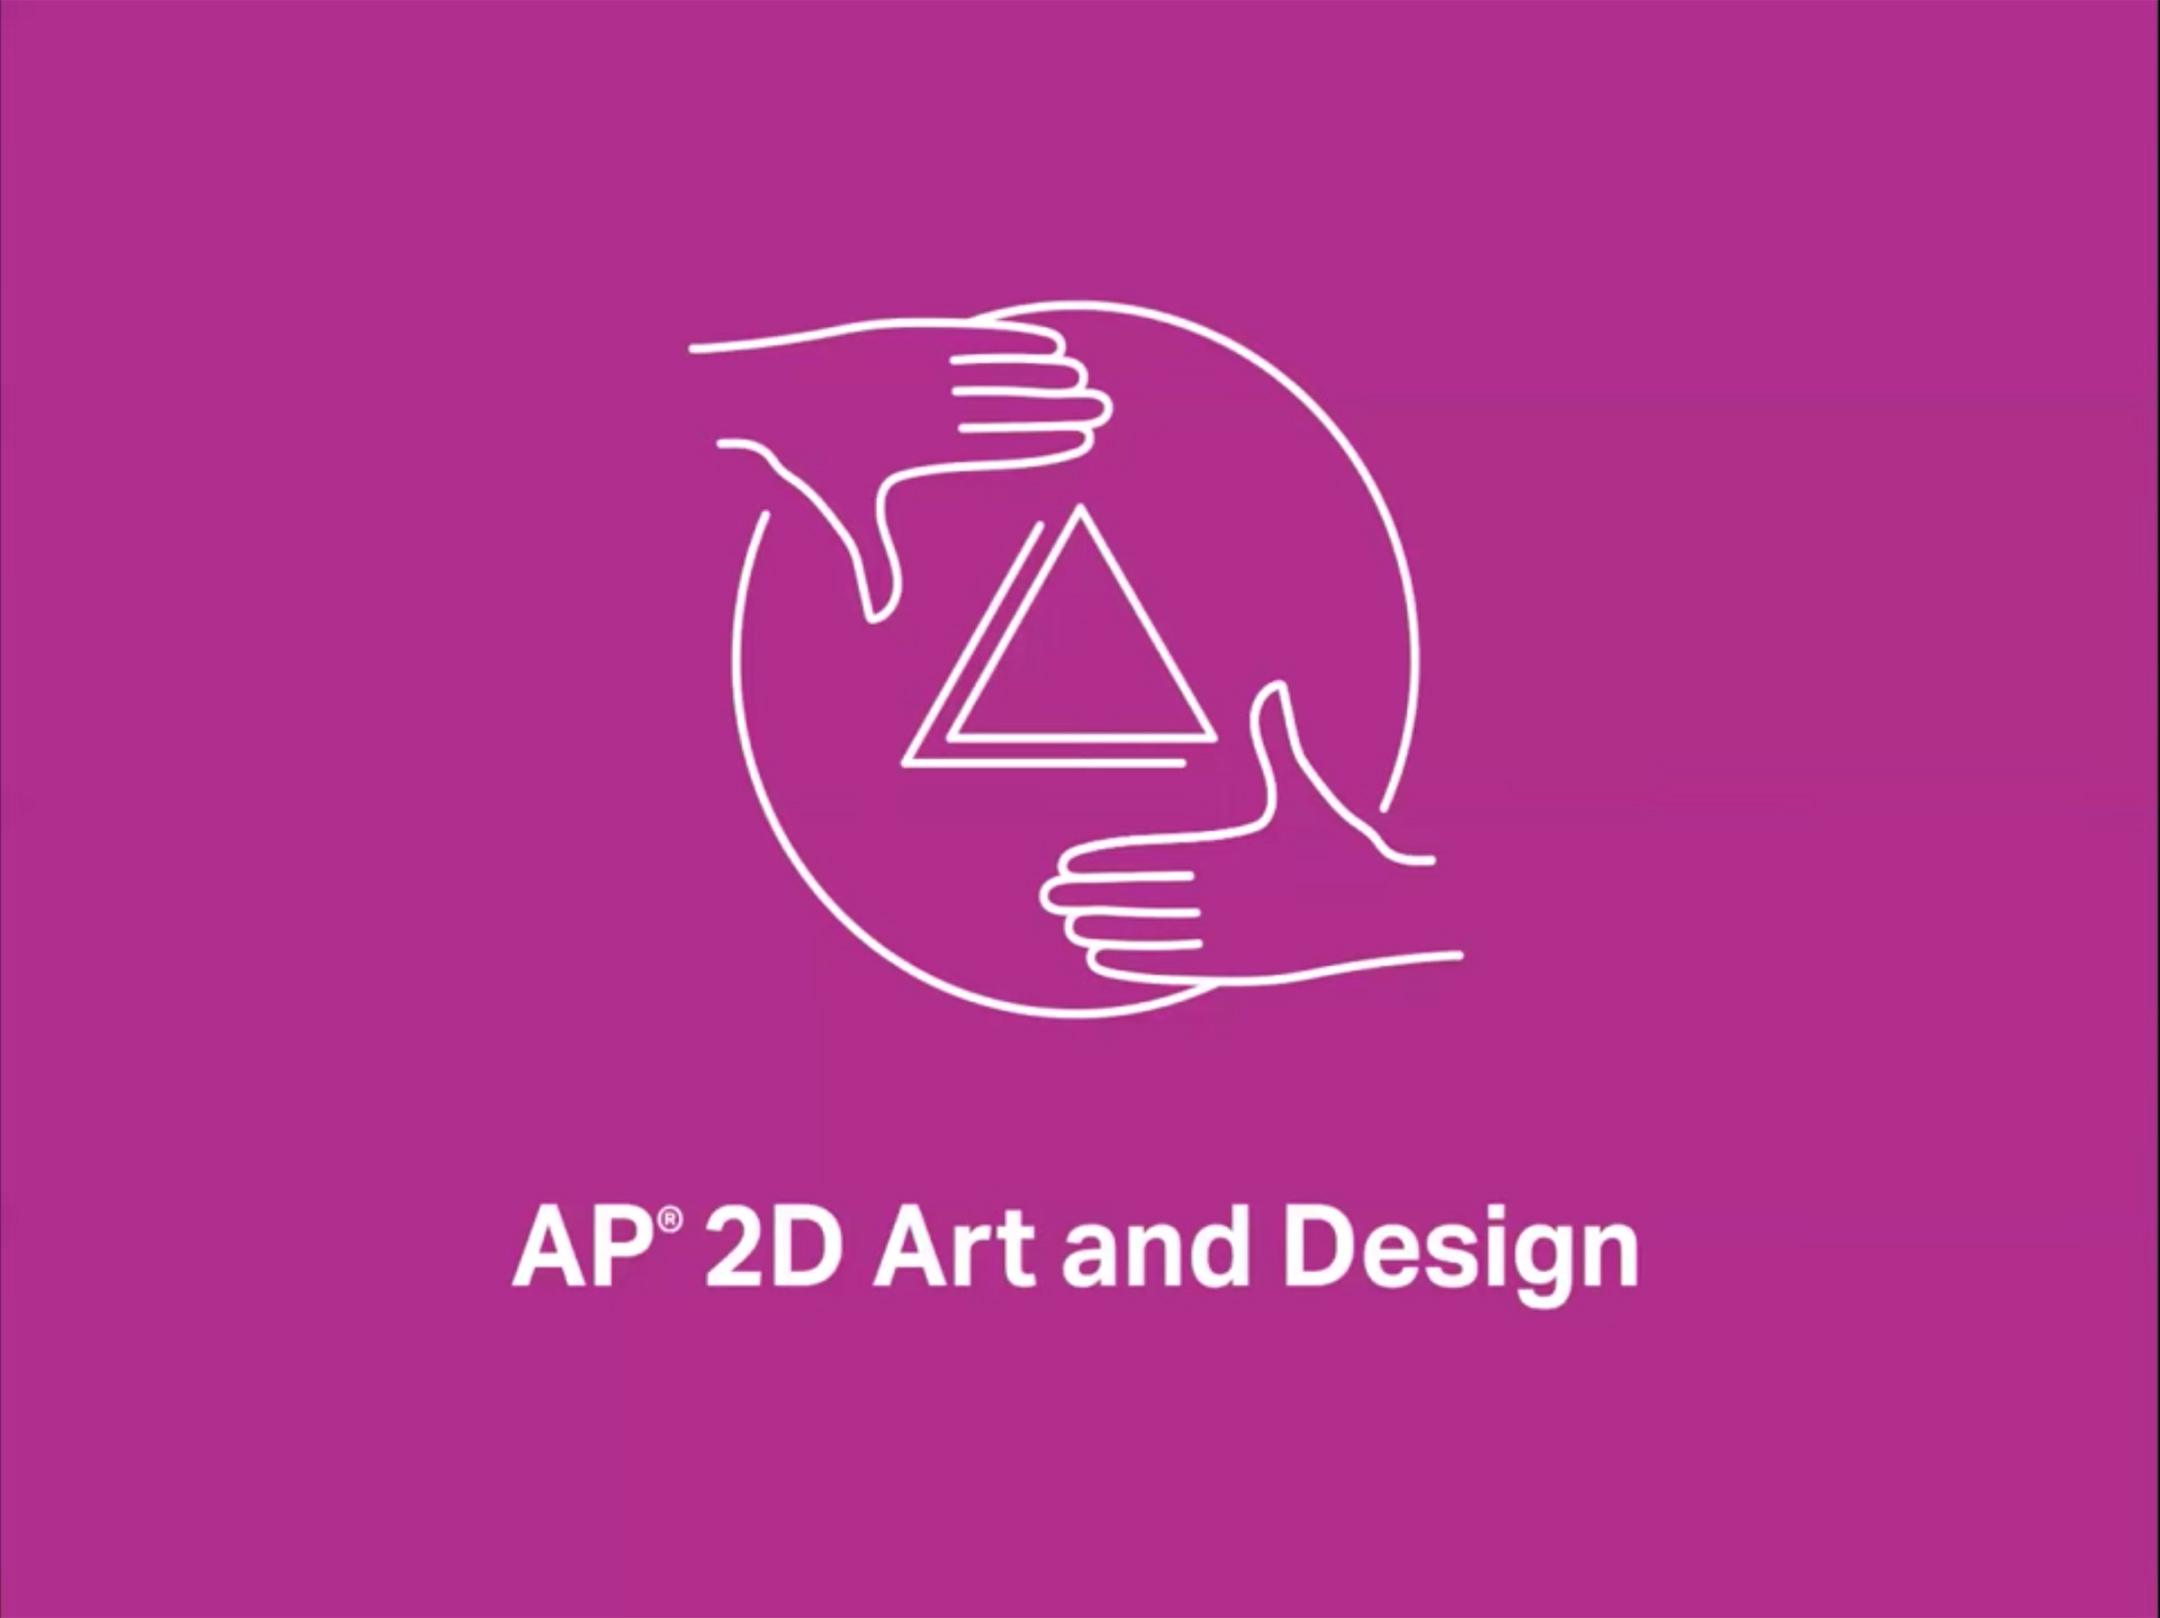 white icon representing ap 2D art and design on a magenta background